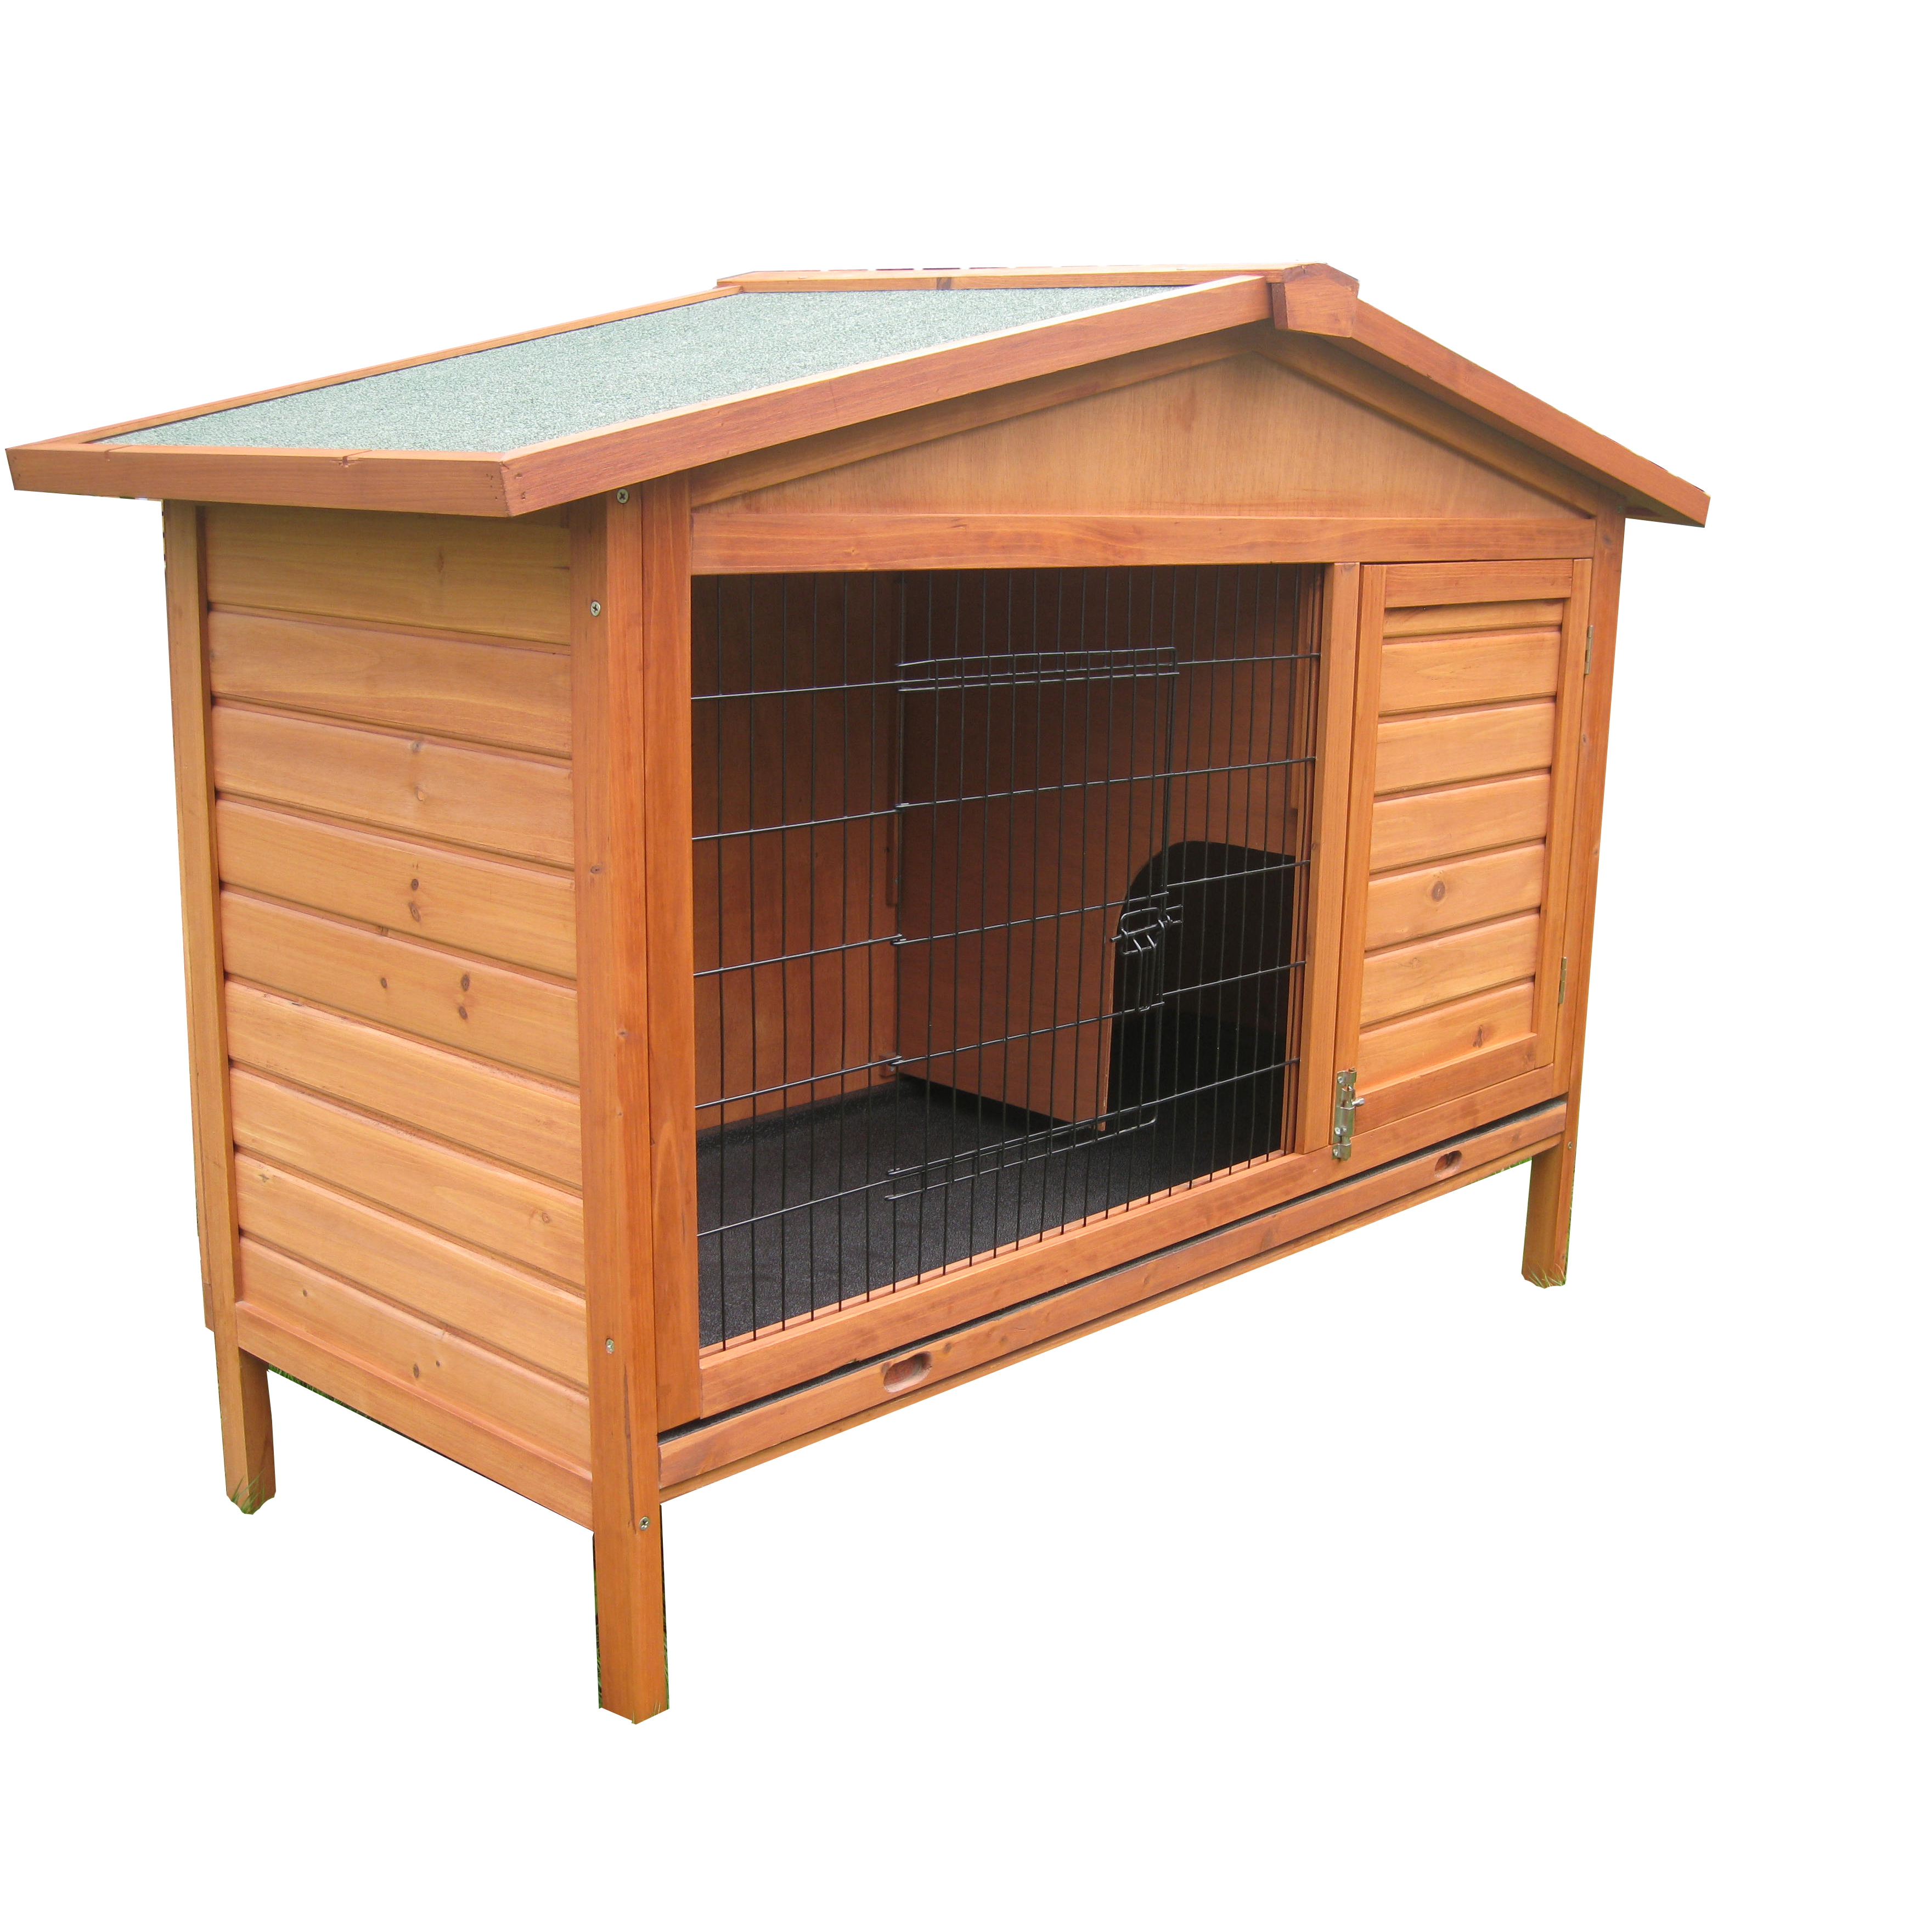 Factory selling Wooden Shed Garden -
 High quality waterproof wooden reptile rabbit cage for sale – Easy